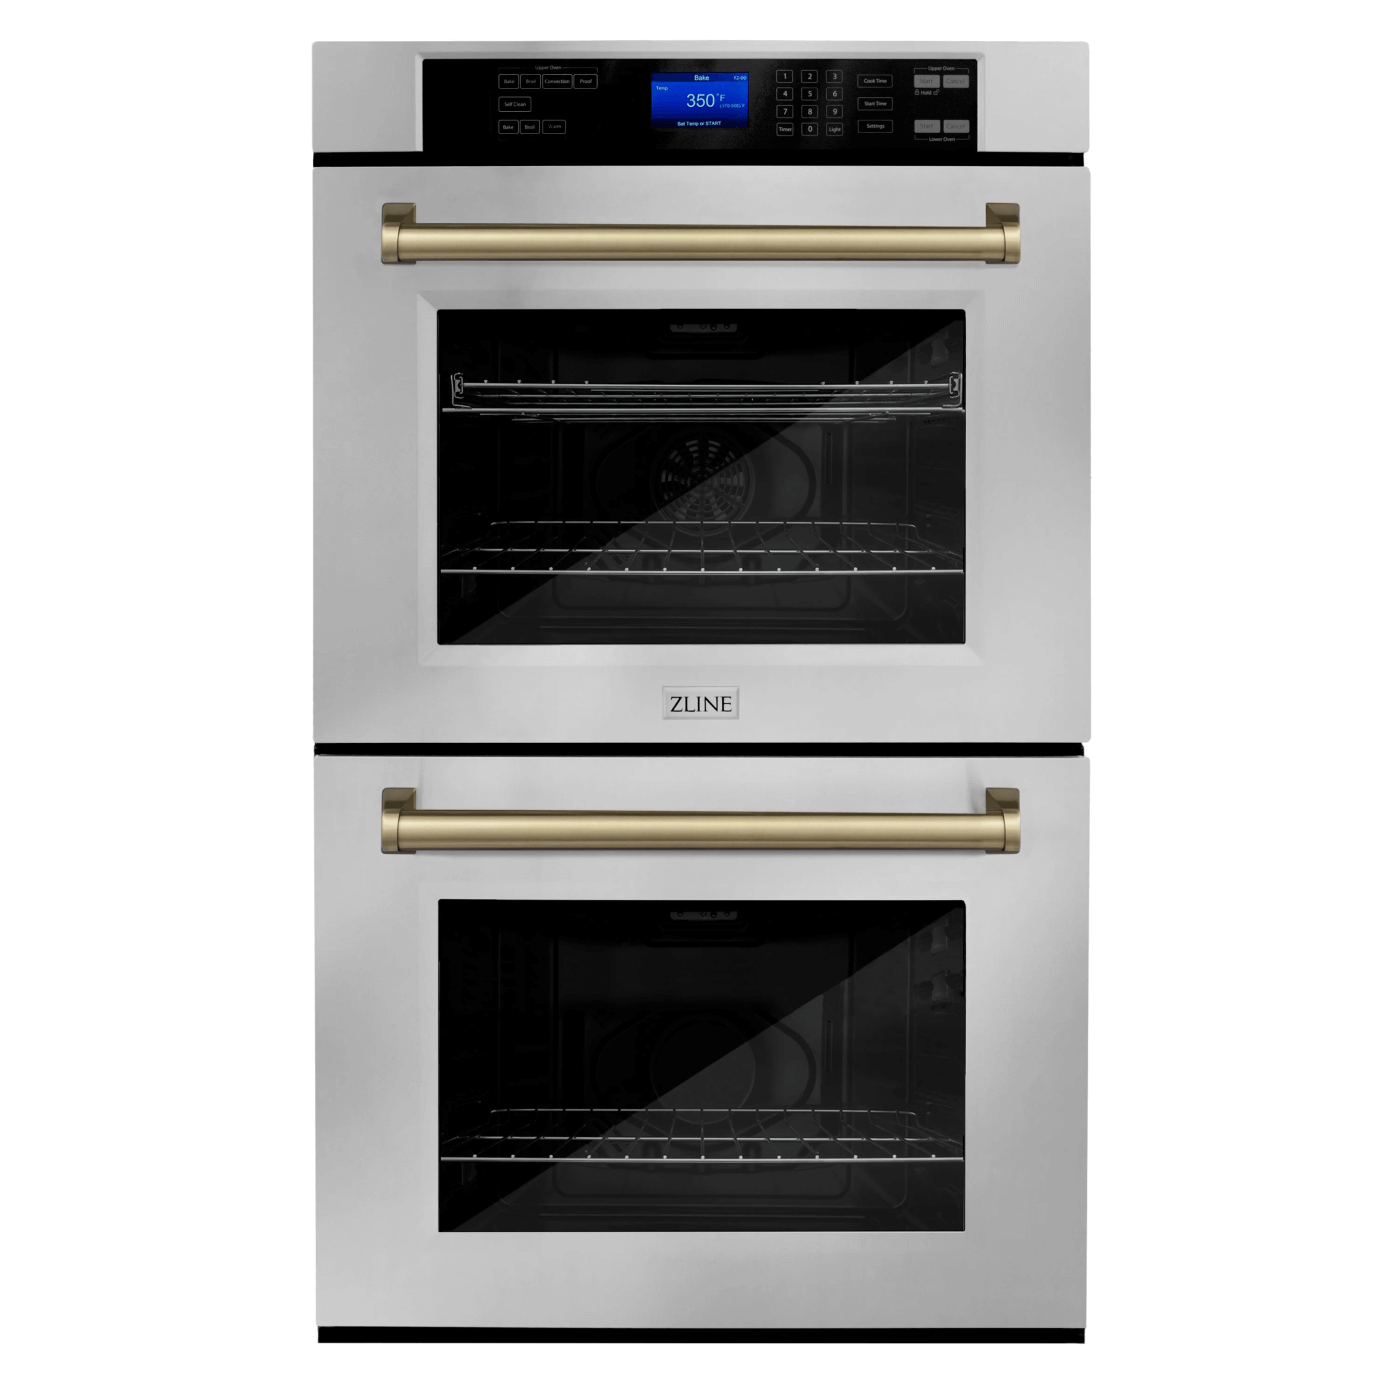 ZLINE 30 in. Double Wall Oven in Stainless Steel with Champagne Bronze Handles - white background